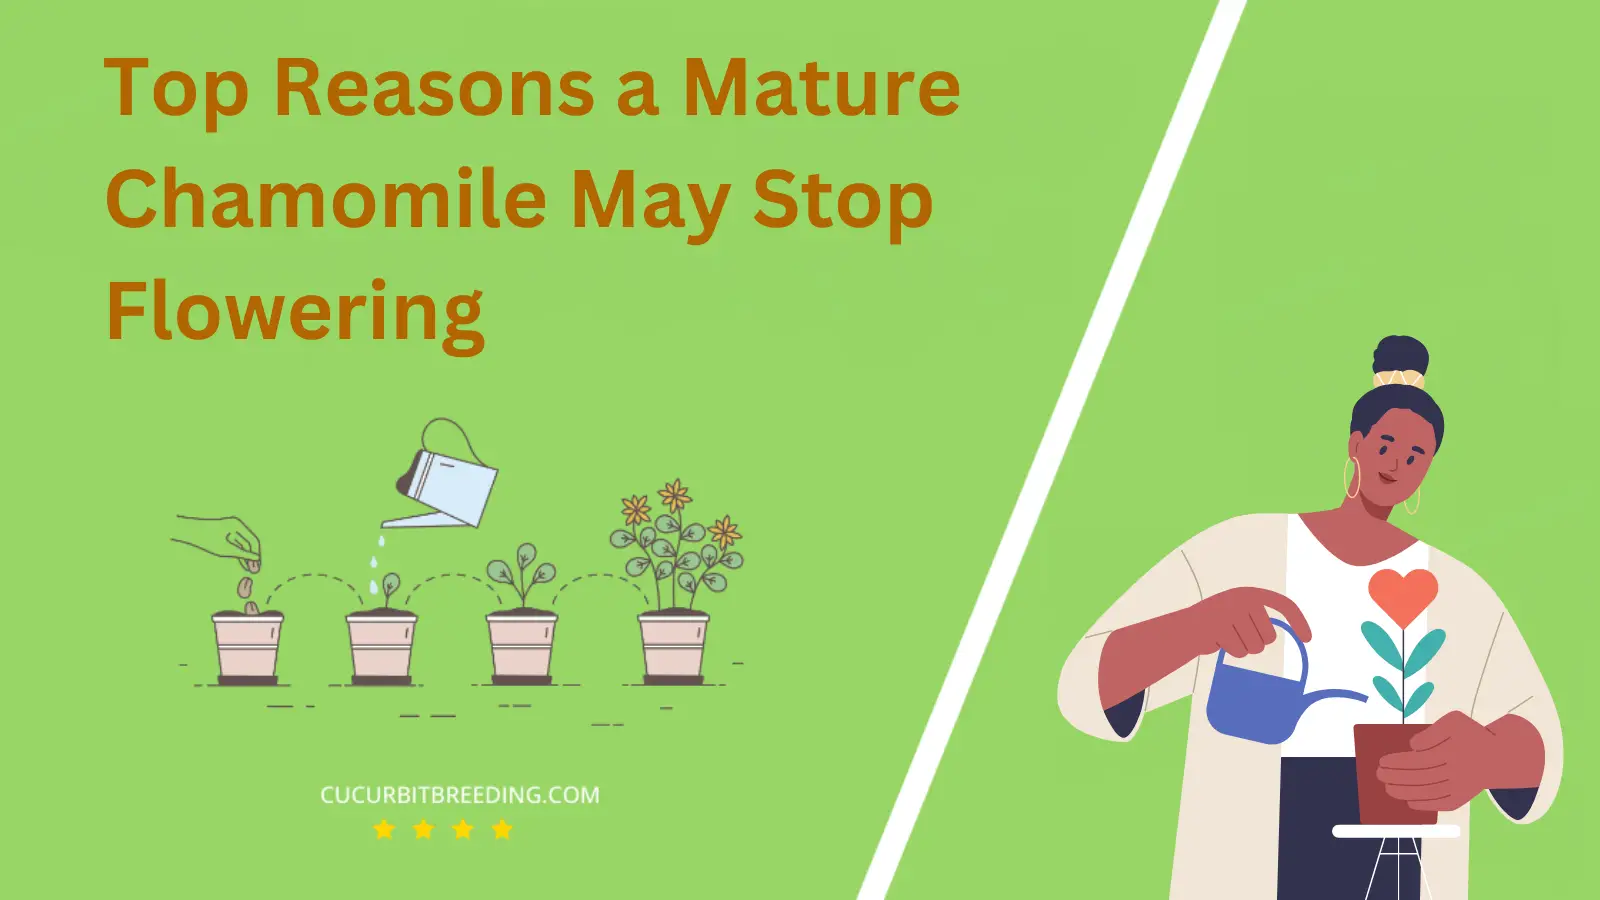 Top Reasons a Mature Chamomile May Stop Flowering